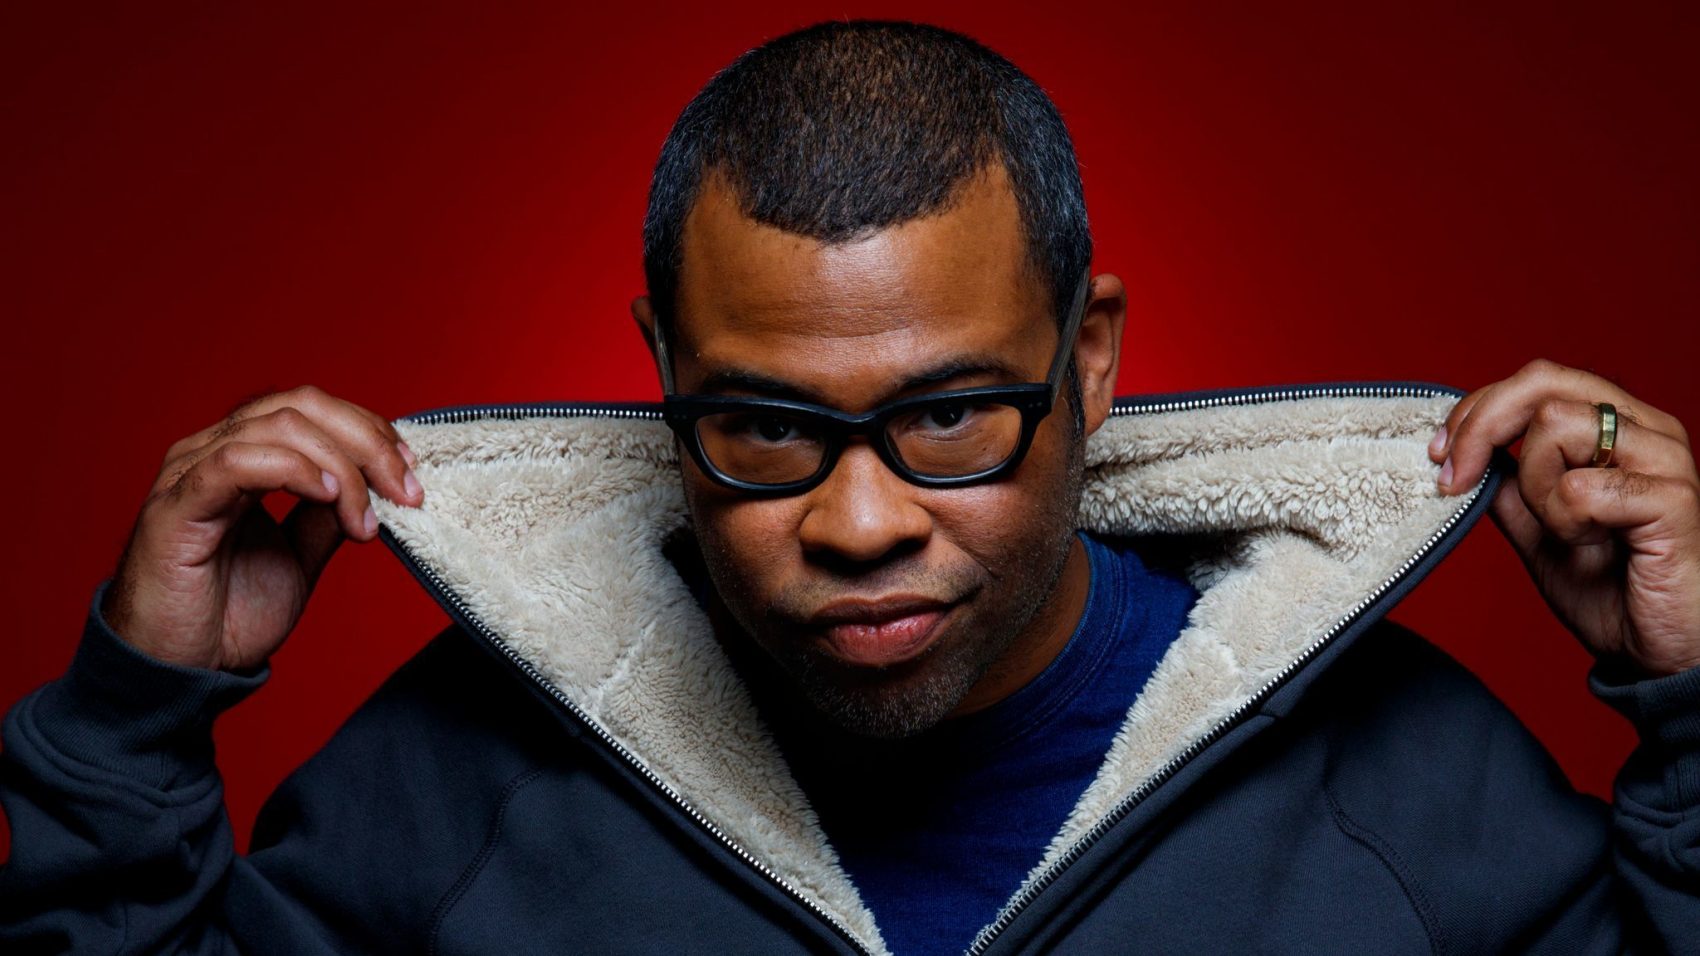 Jordan peele signs deal with universal for new movies